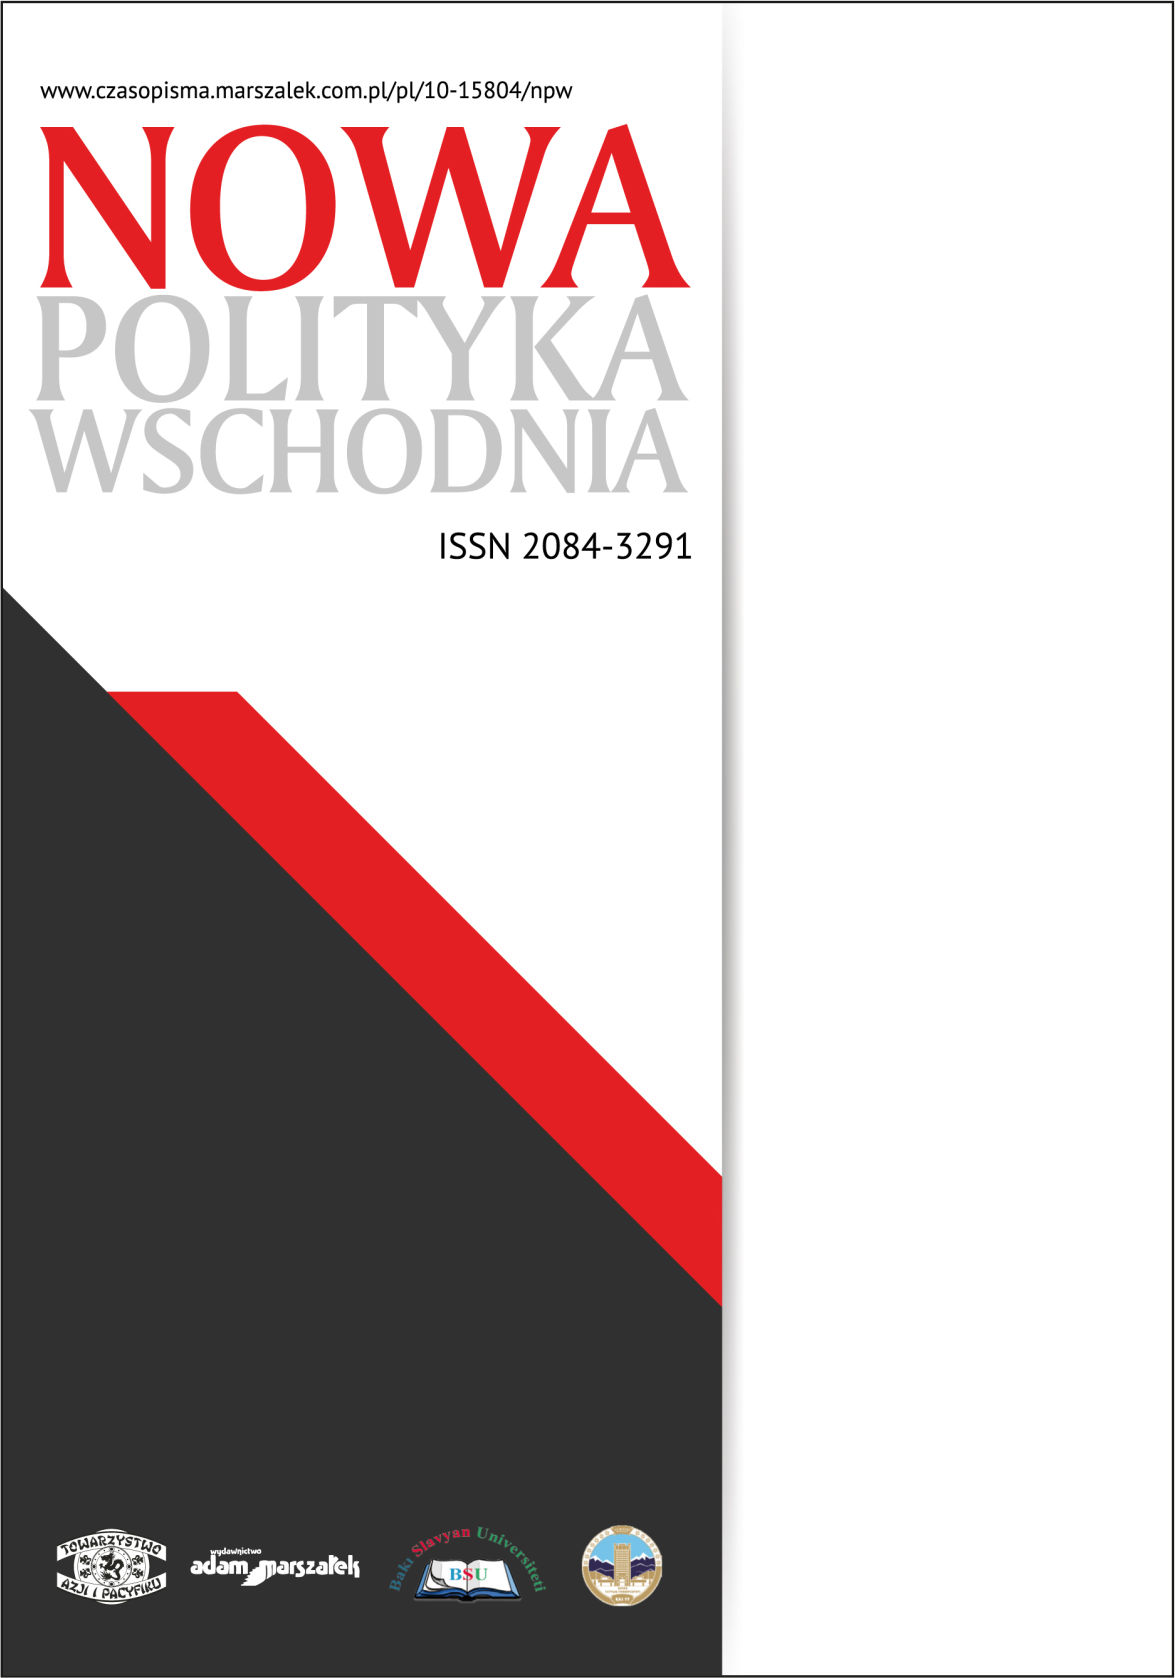 Systemic Geopolitical Analysis in the research of power distribution in Eastern Europe